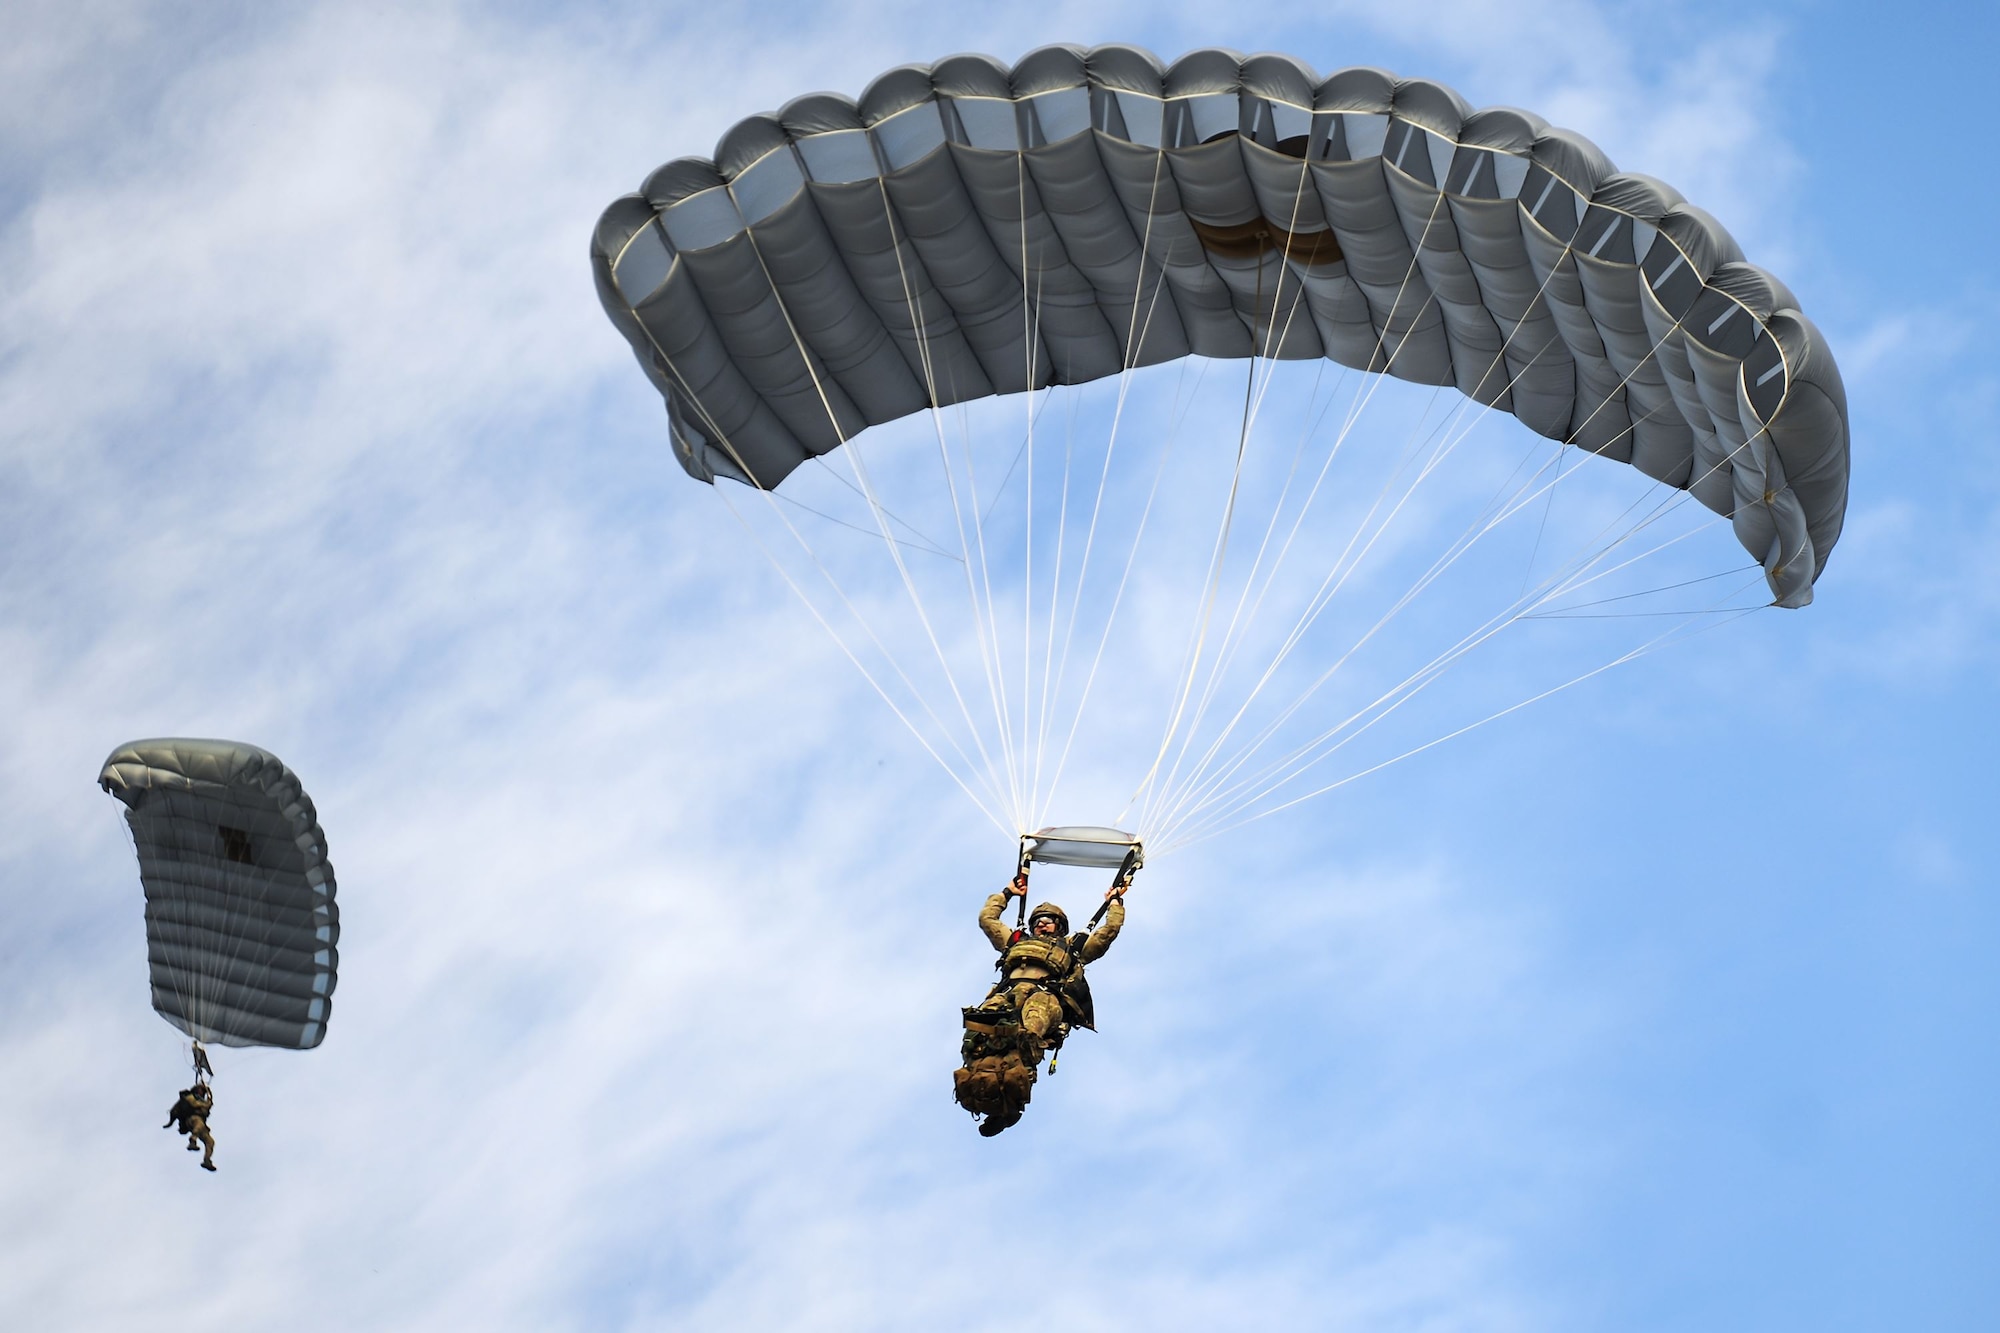 Pararescuemen from the 38th Rescue Squadron (RQS) parachute from an HC-130J Combat King II during a full mission profile exercise, Dec. 14, 2017, at Moody Air Force Base Ga. During the training, the 38th RQS recovered victims while under enemy fire to prepare for future search and rescue missions and to assess their unit’s ability to work cohesively to accomplish the mission. (U.S. Air Force photo by Airman Eugene Oliver)